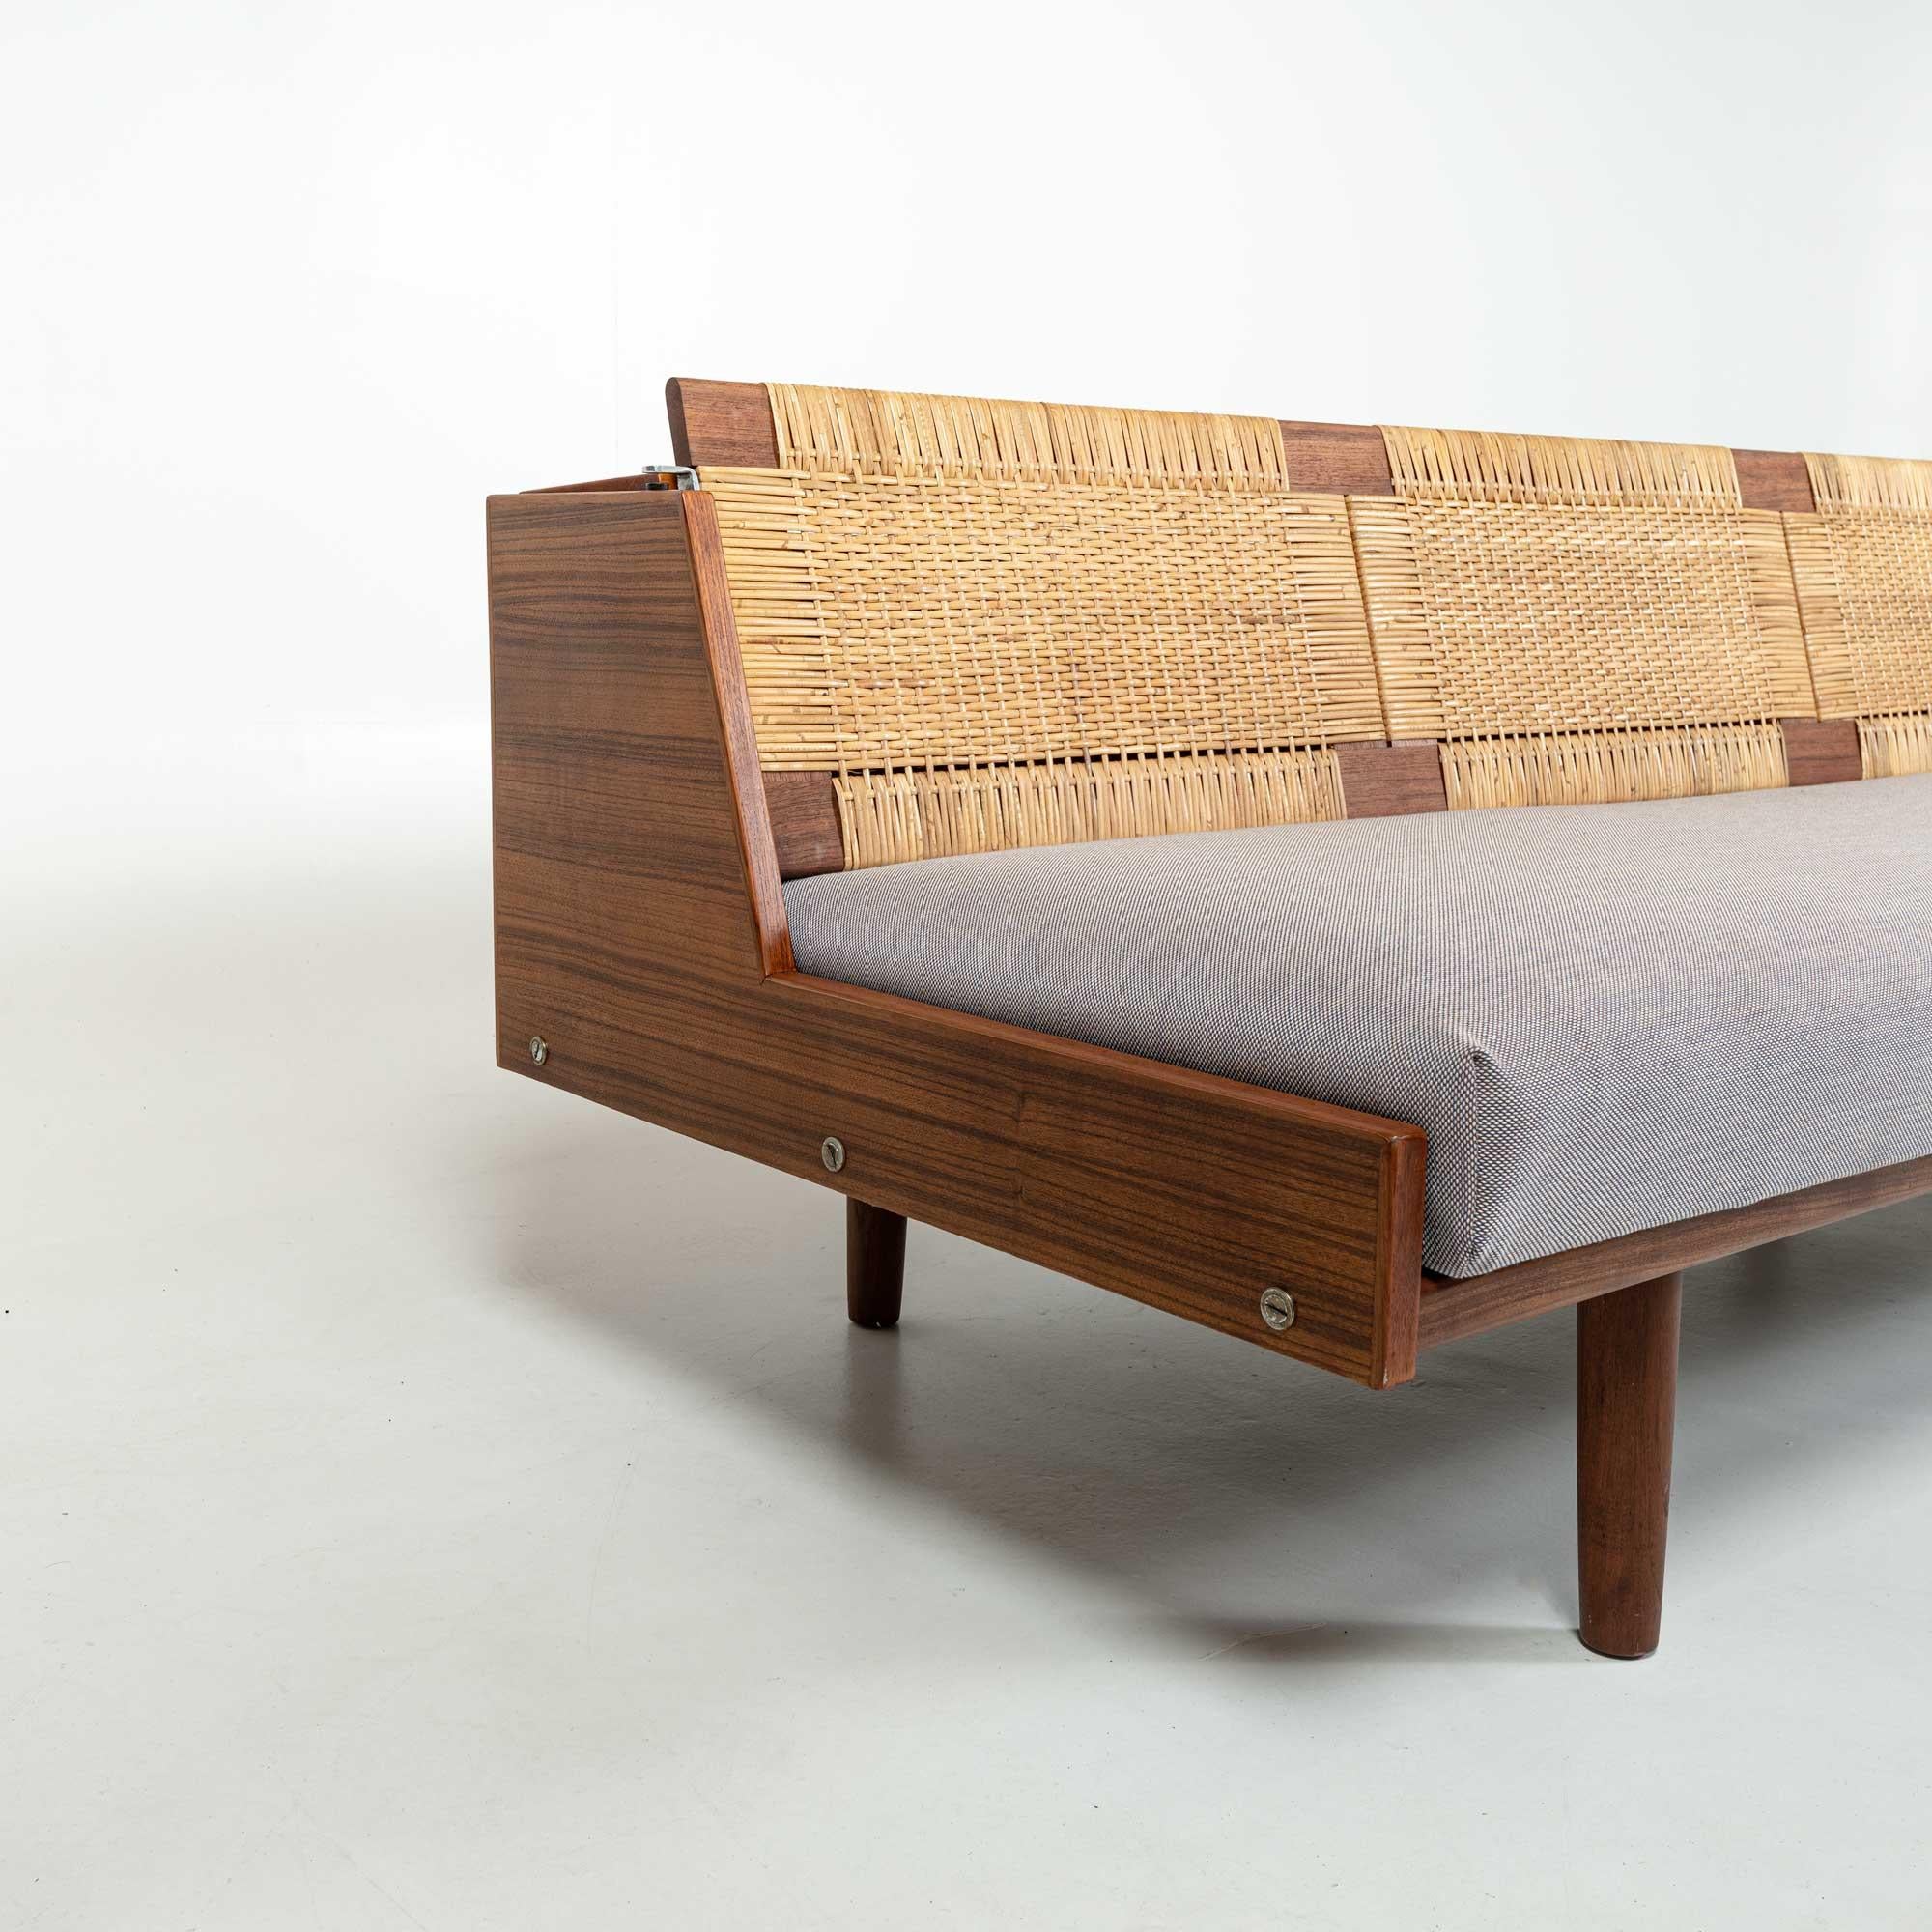 Hans J. Wegner for GETAMA Sofa Daybed Model GE7 in Teak and Cane 1950s In Good Condition For Sale In Seattle, WA